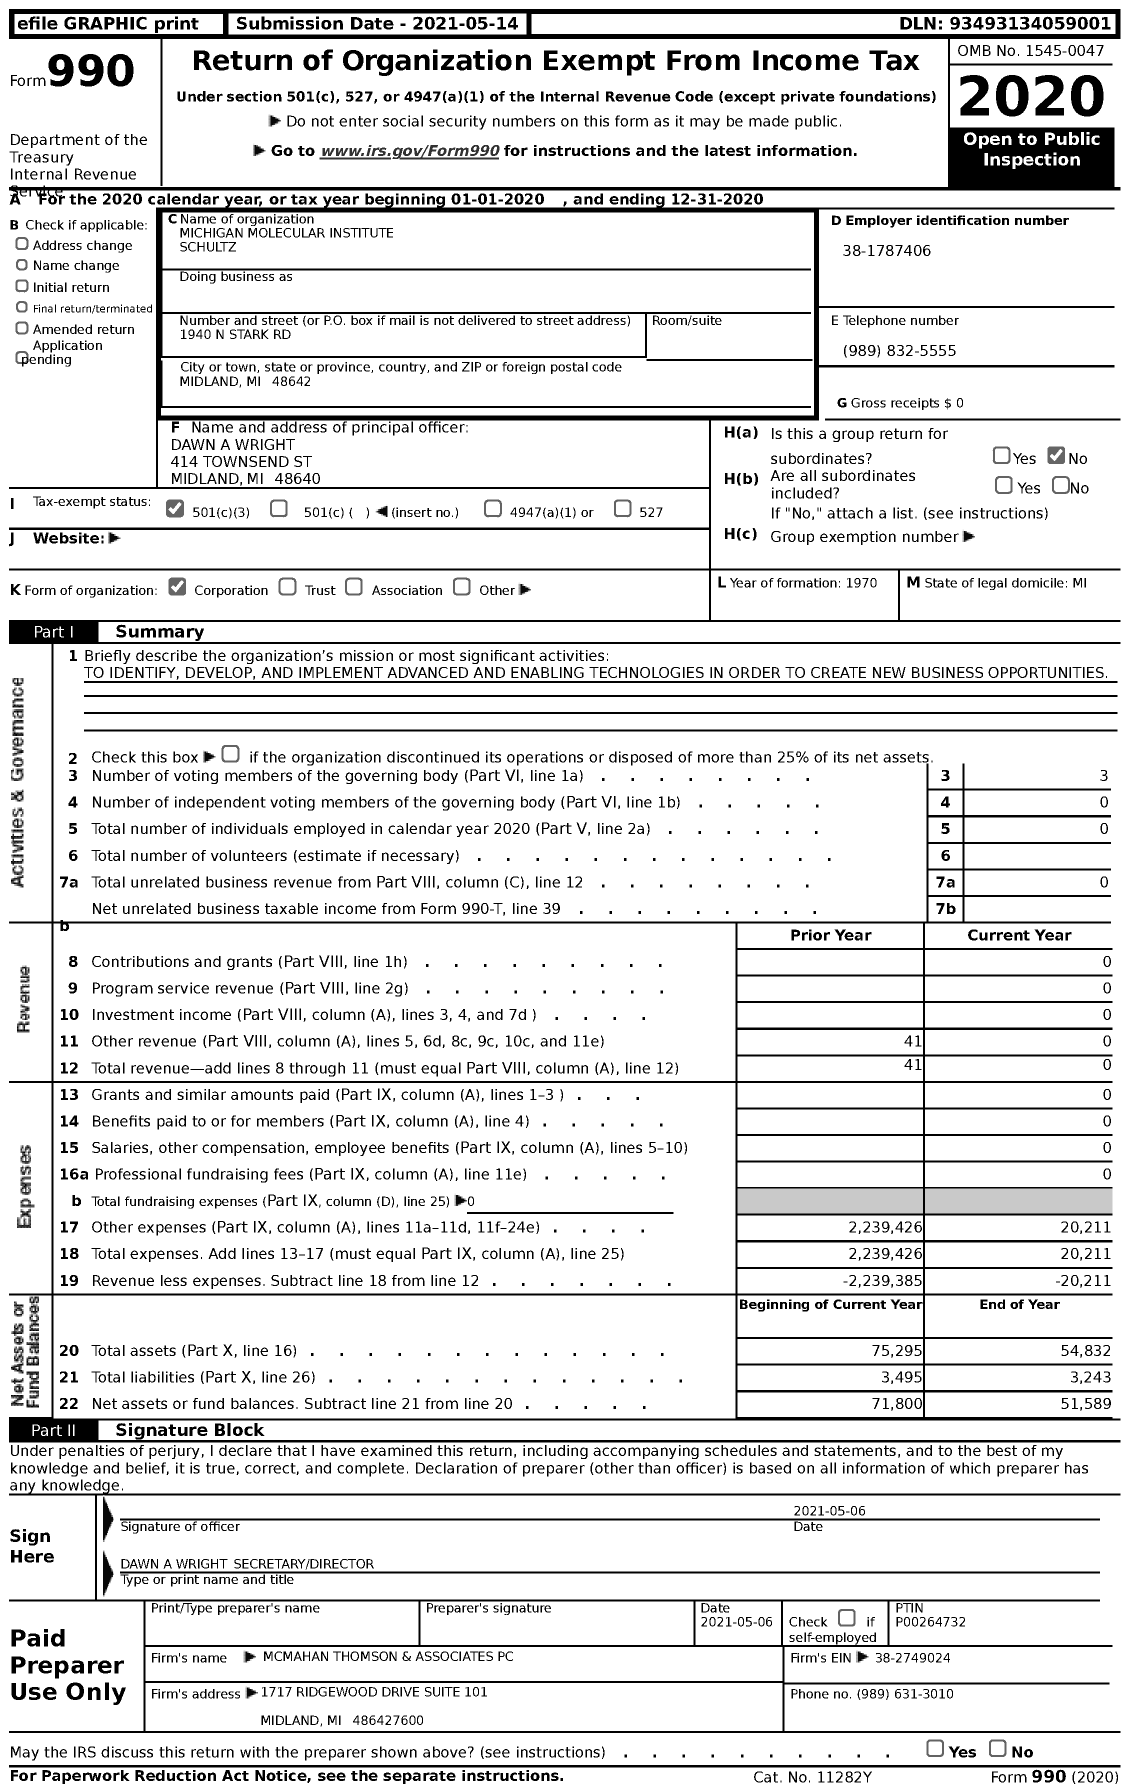 Image of first page of 2020 Form 990 for Michigan Molecular Institute Schultz (MMI)